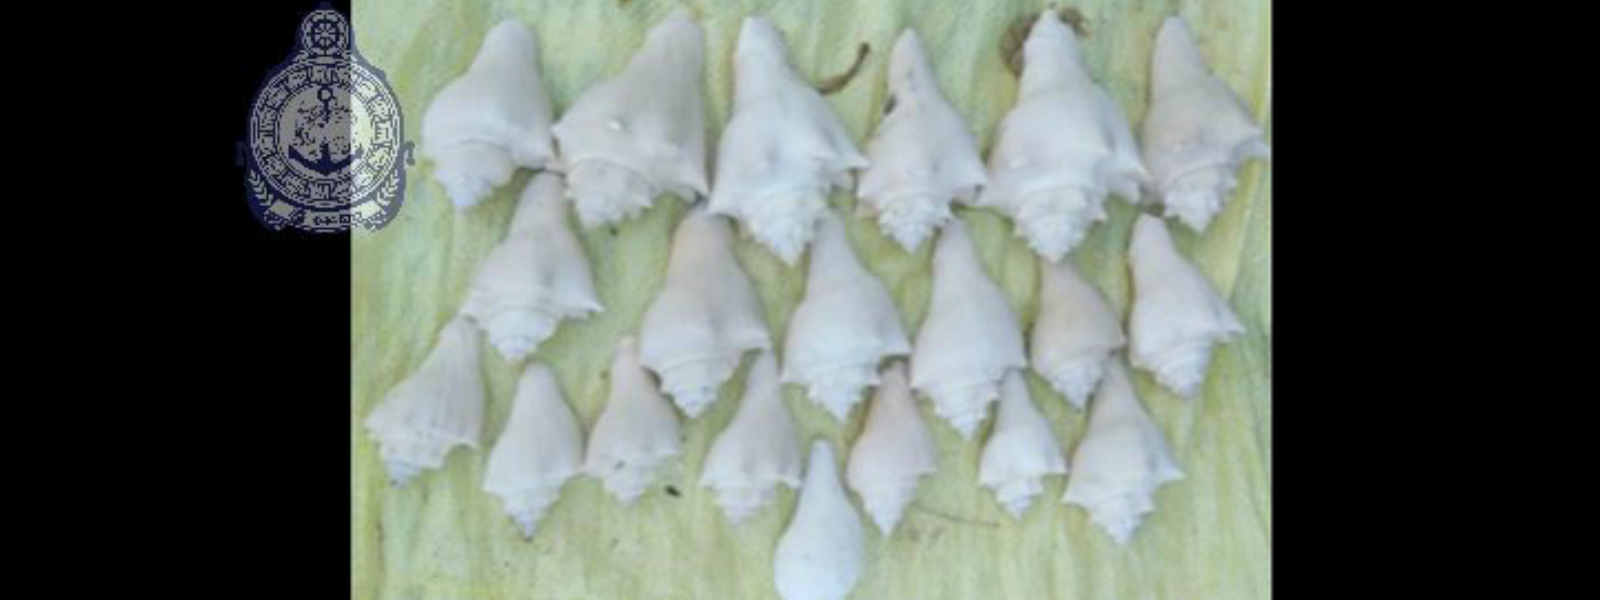 Navy arrests person with 24 Conch Shells